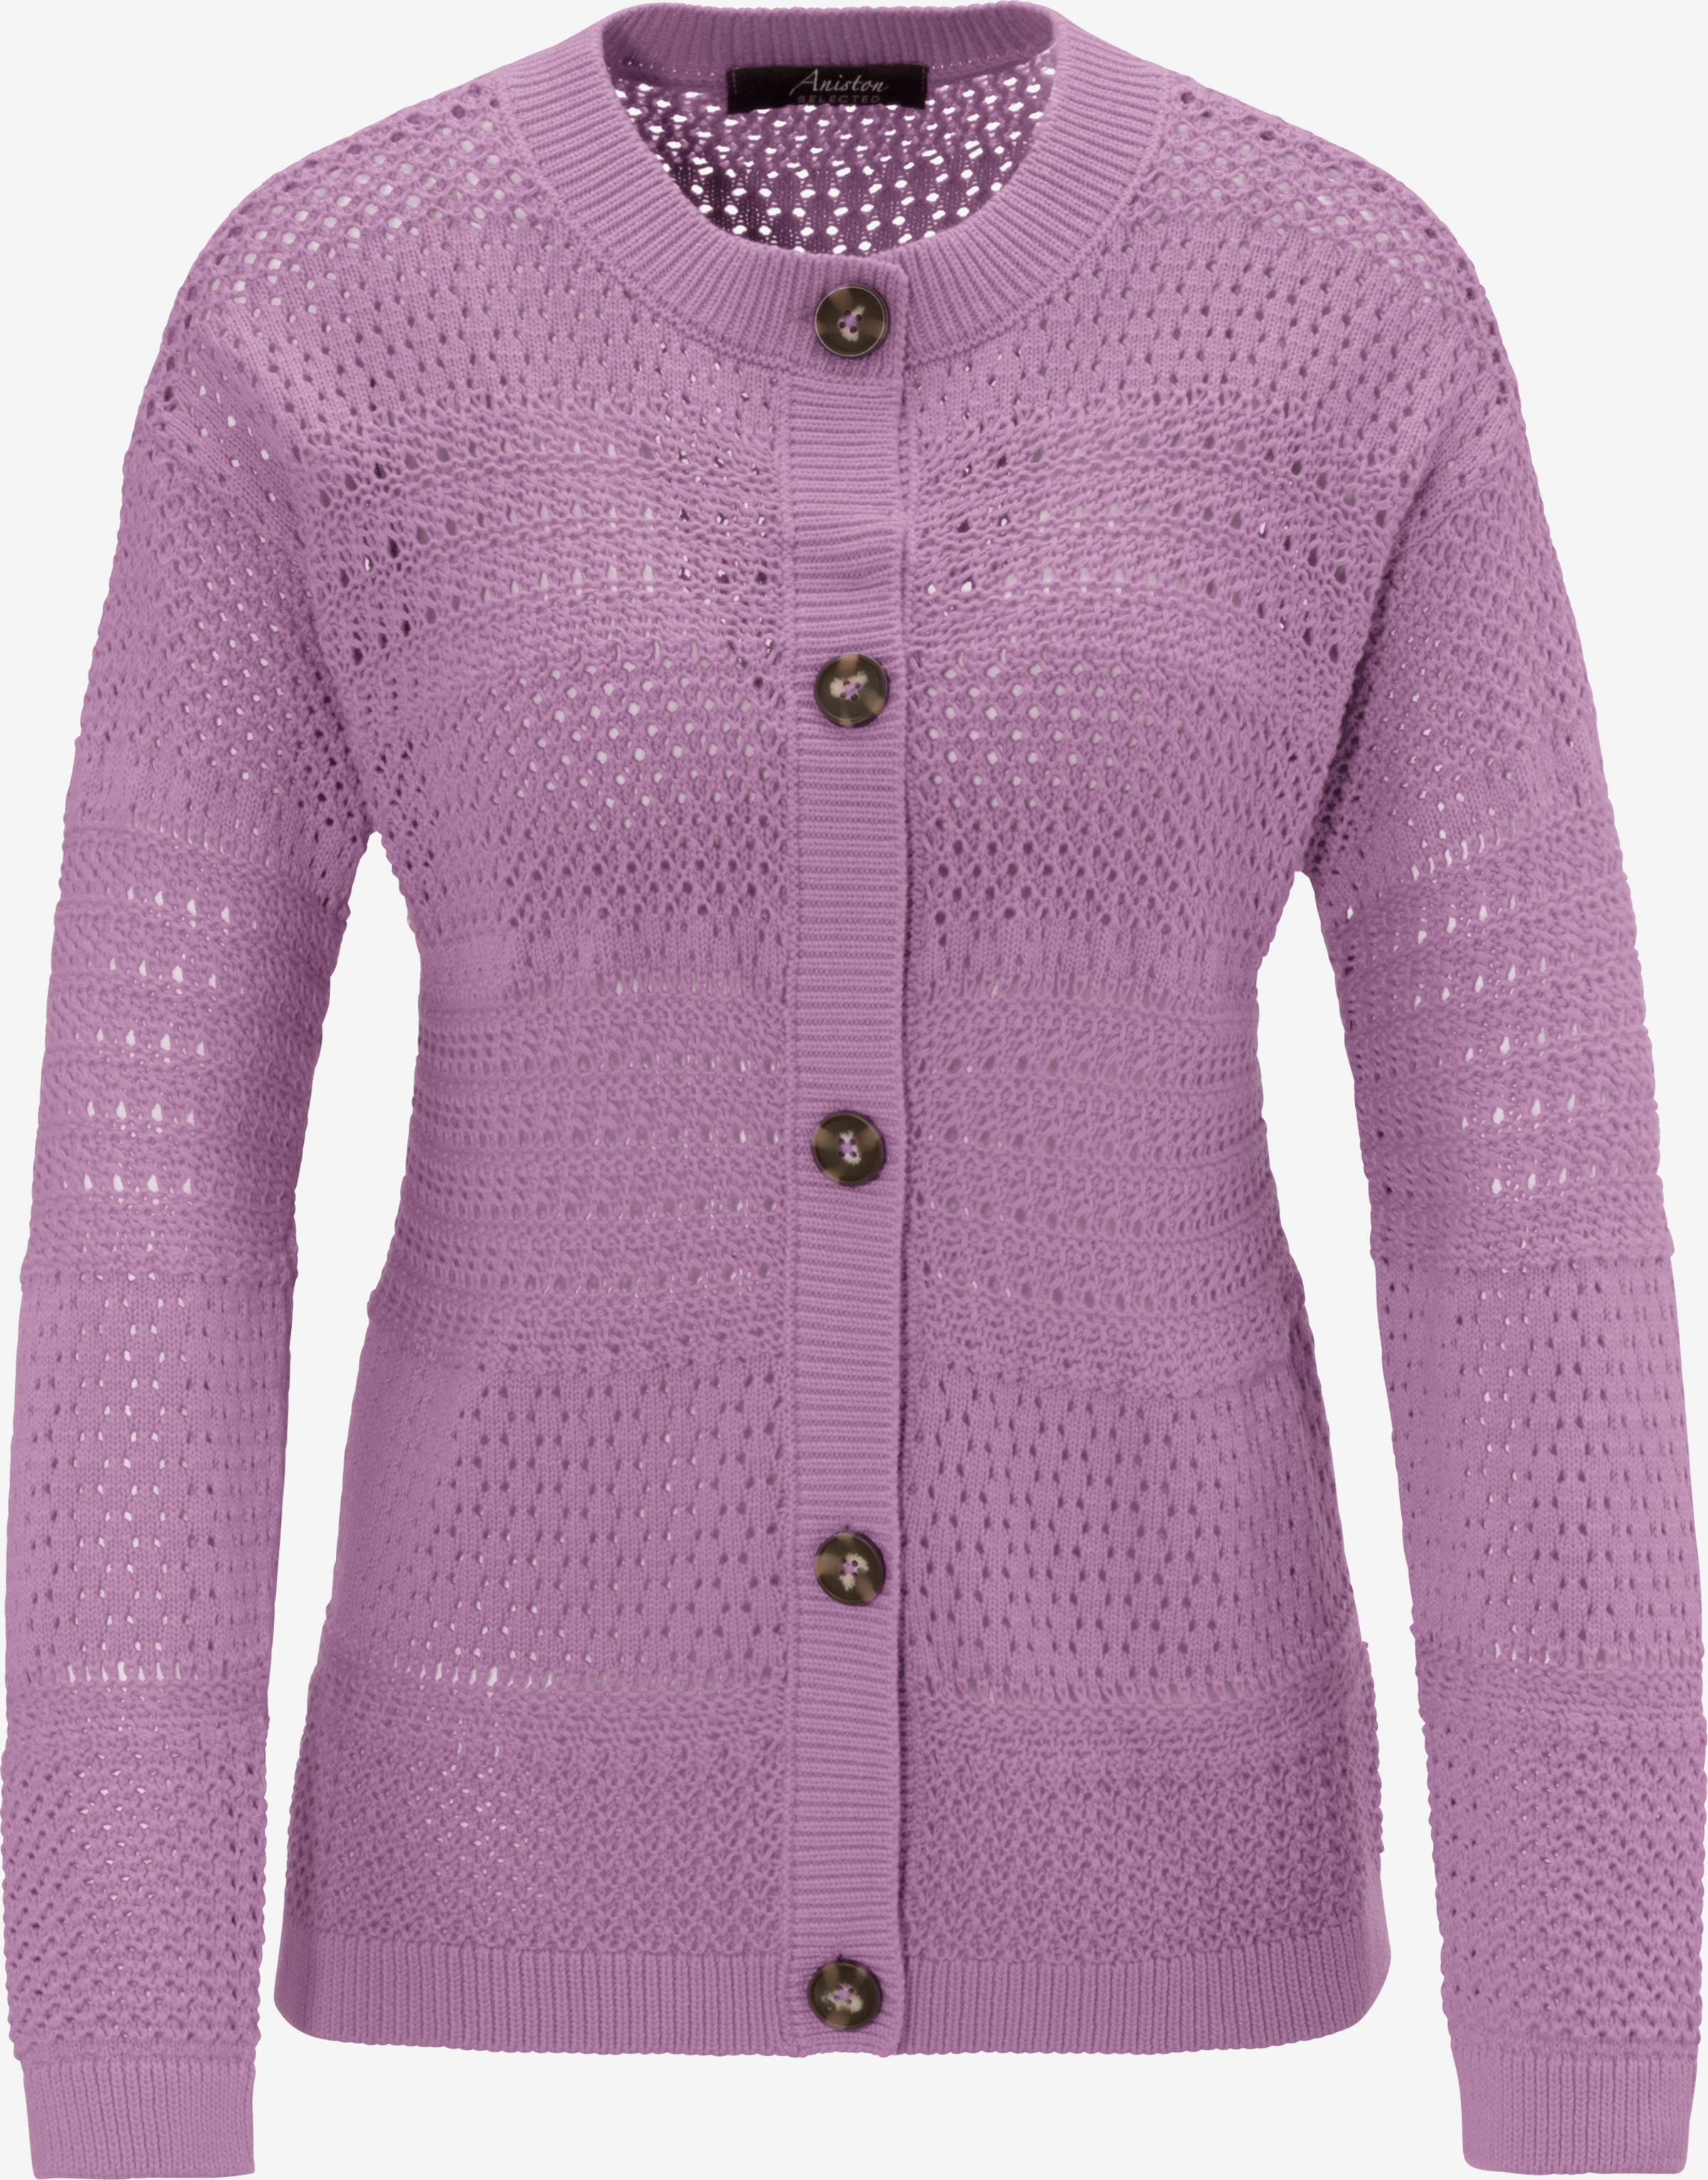 Aniston SELECTED Strickjacke in ABOUT YOU Lila 